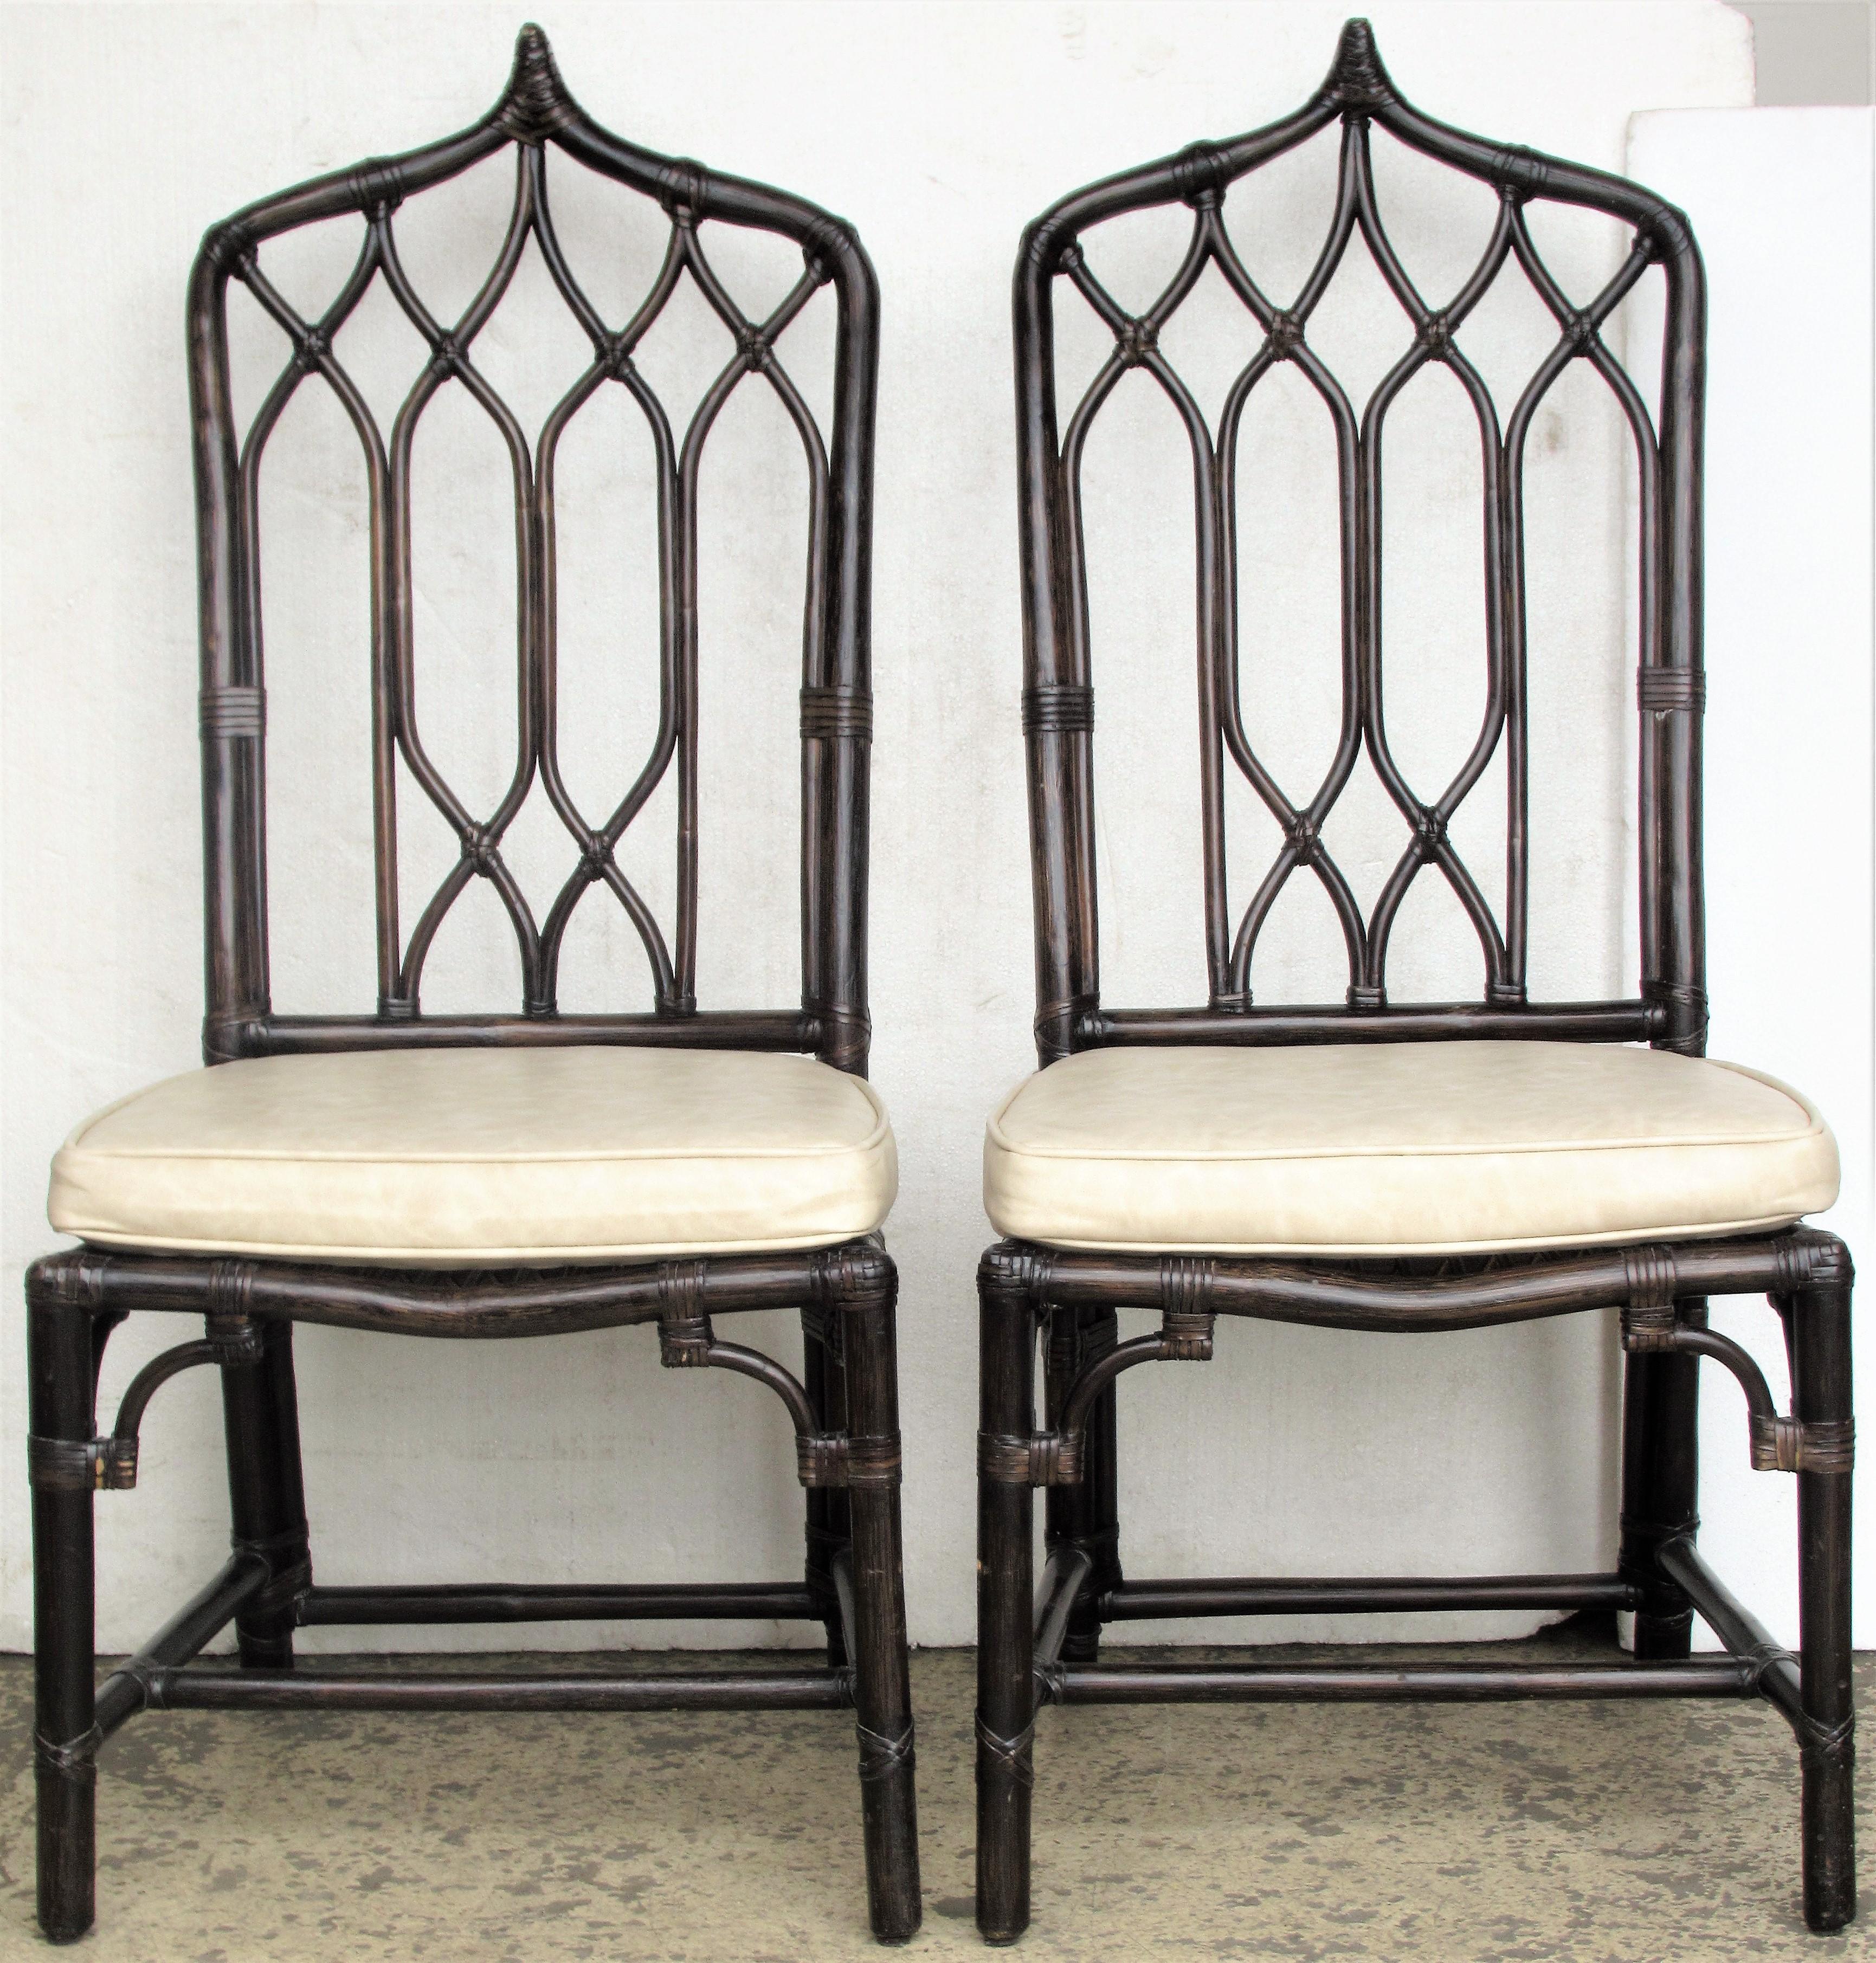 Matching set of four Chinese Chippendale / cathedral style tall peaked top chairs by McGuire in great all original condition. McGuire of San Francisco brass tags present on underside, circa 1970s. Look at all pictures and read condition report in